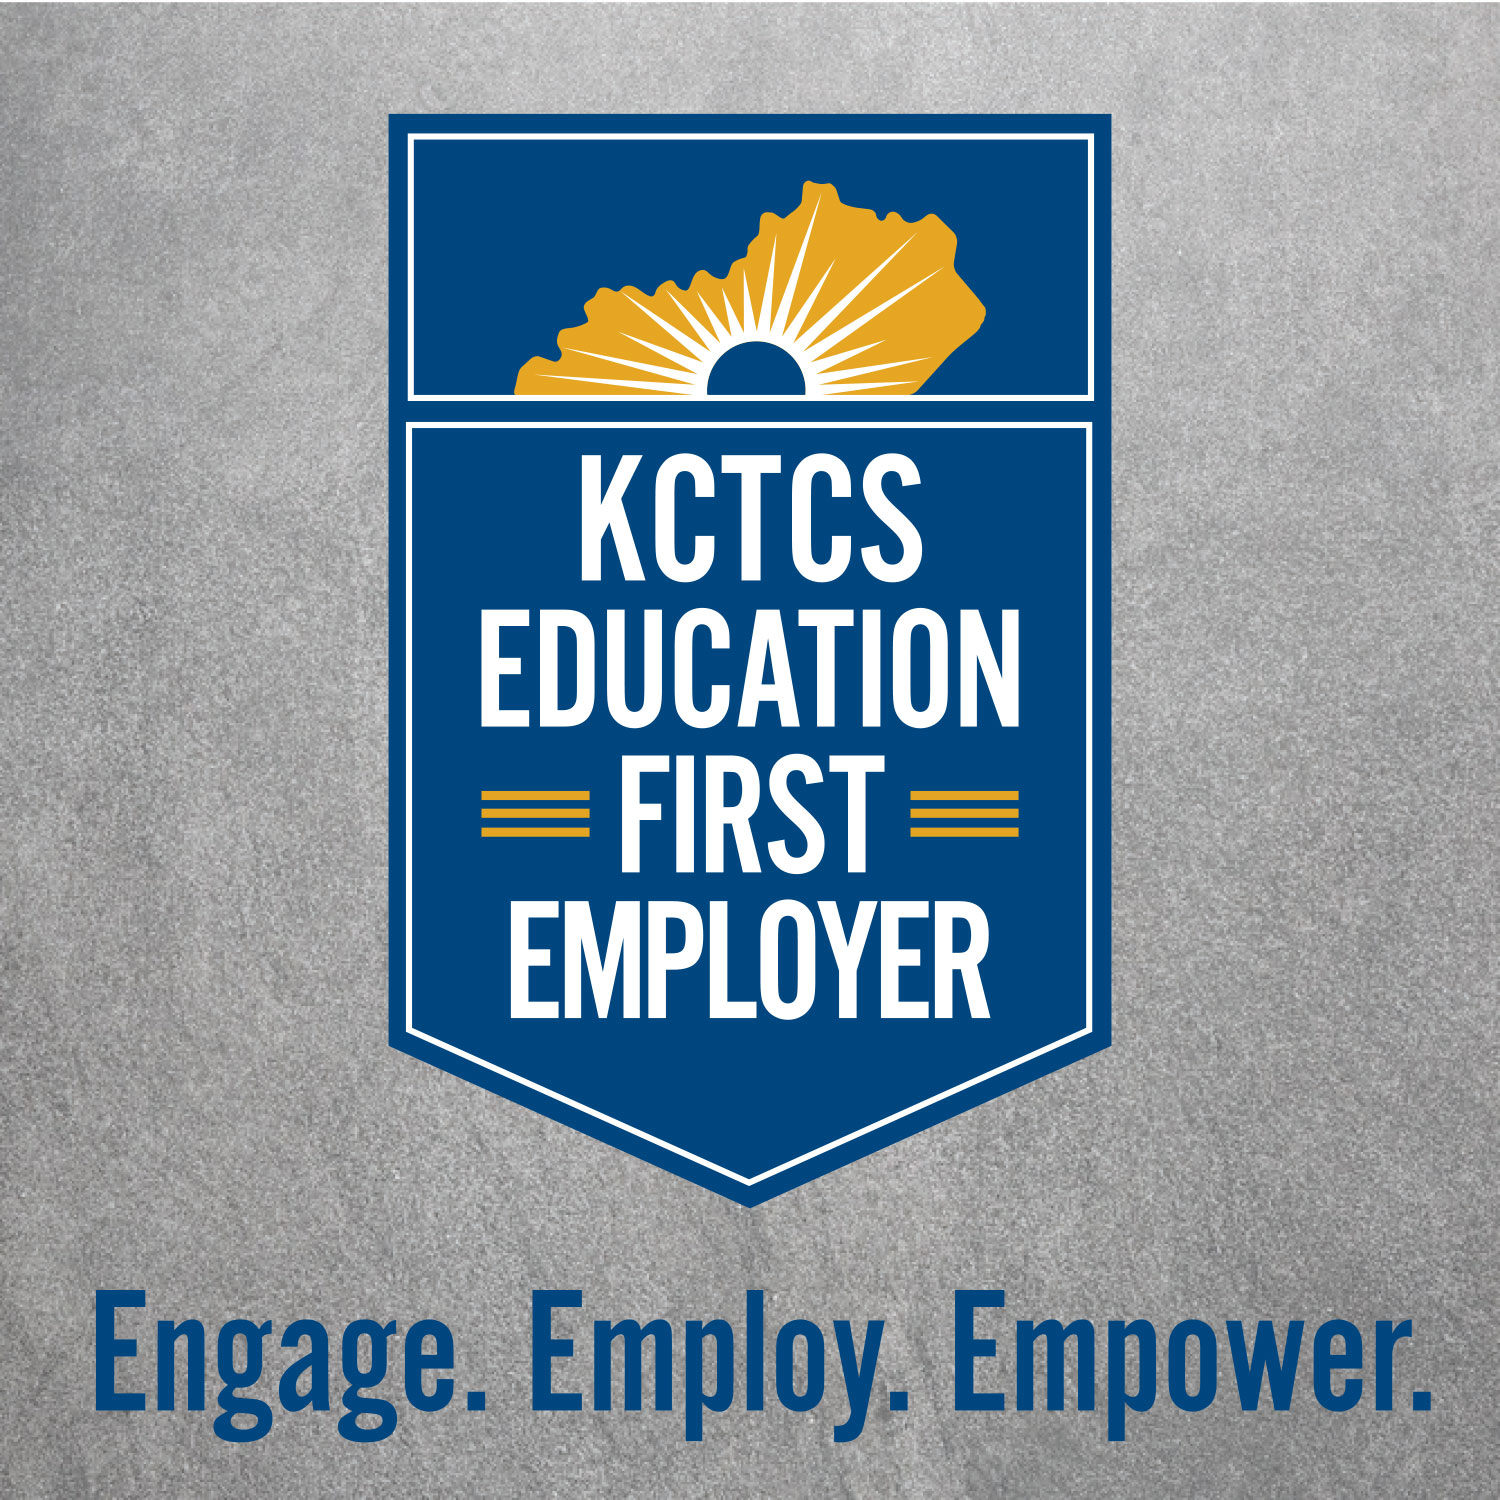 KCTCS Education First Employer: Engage. Employ. Empower.